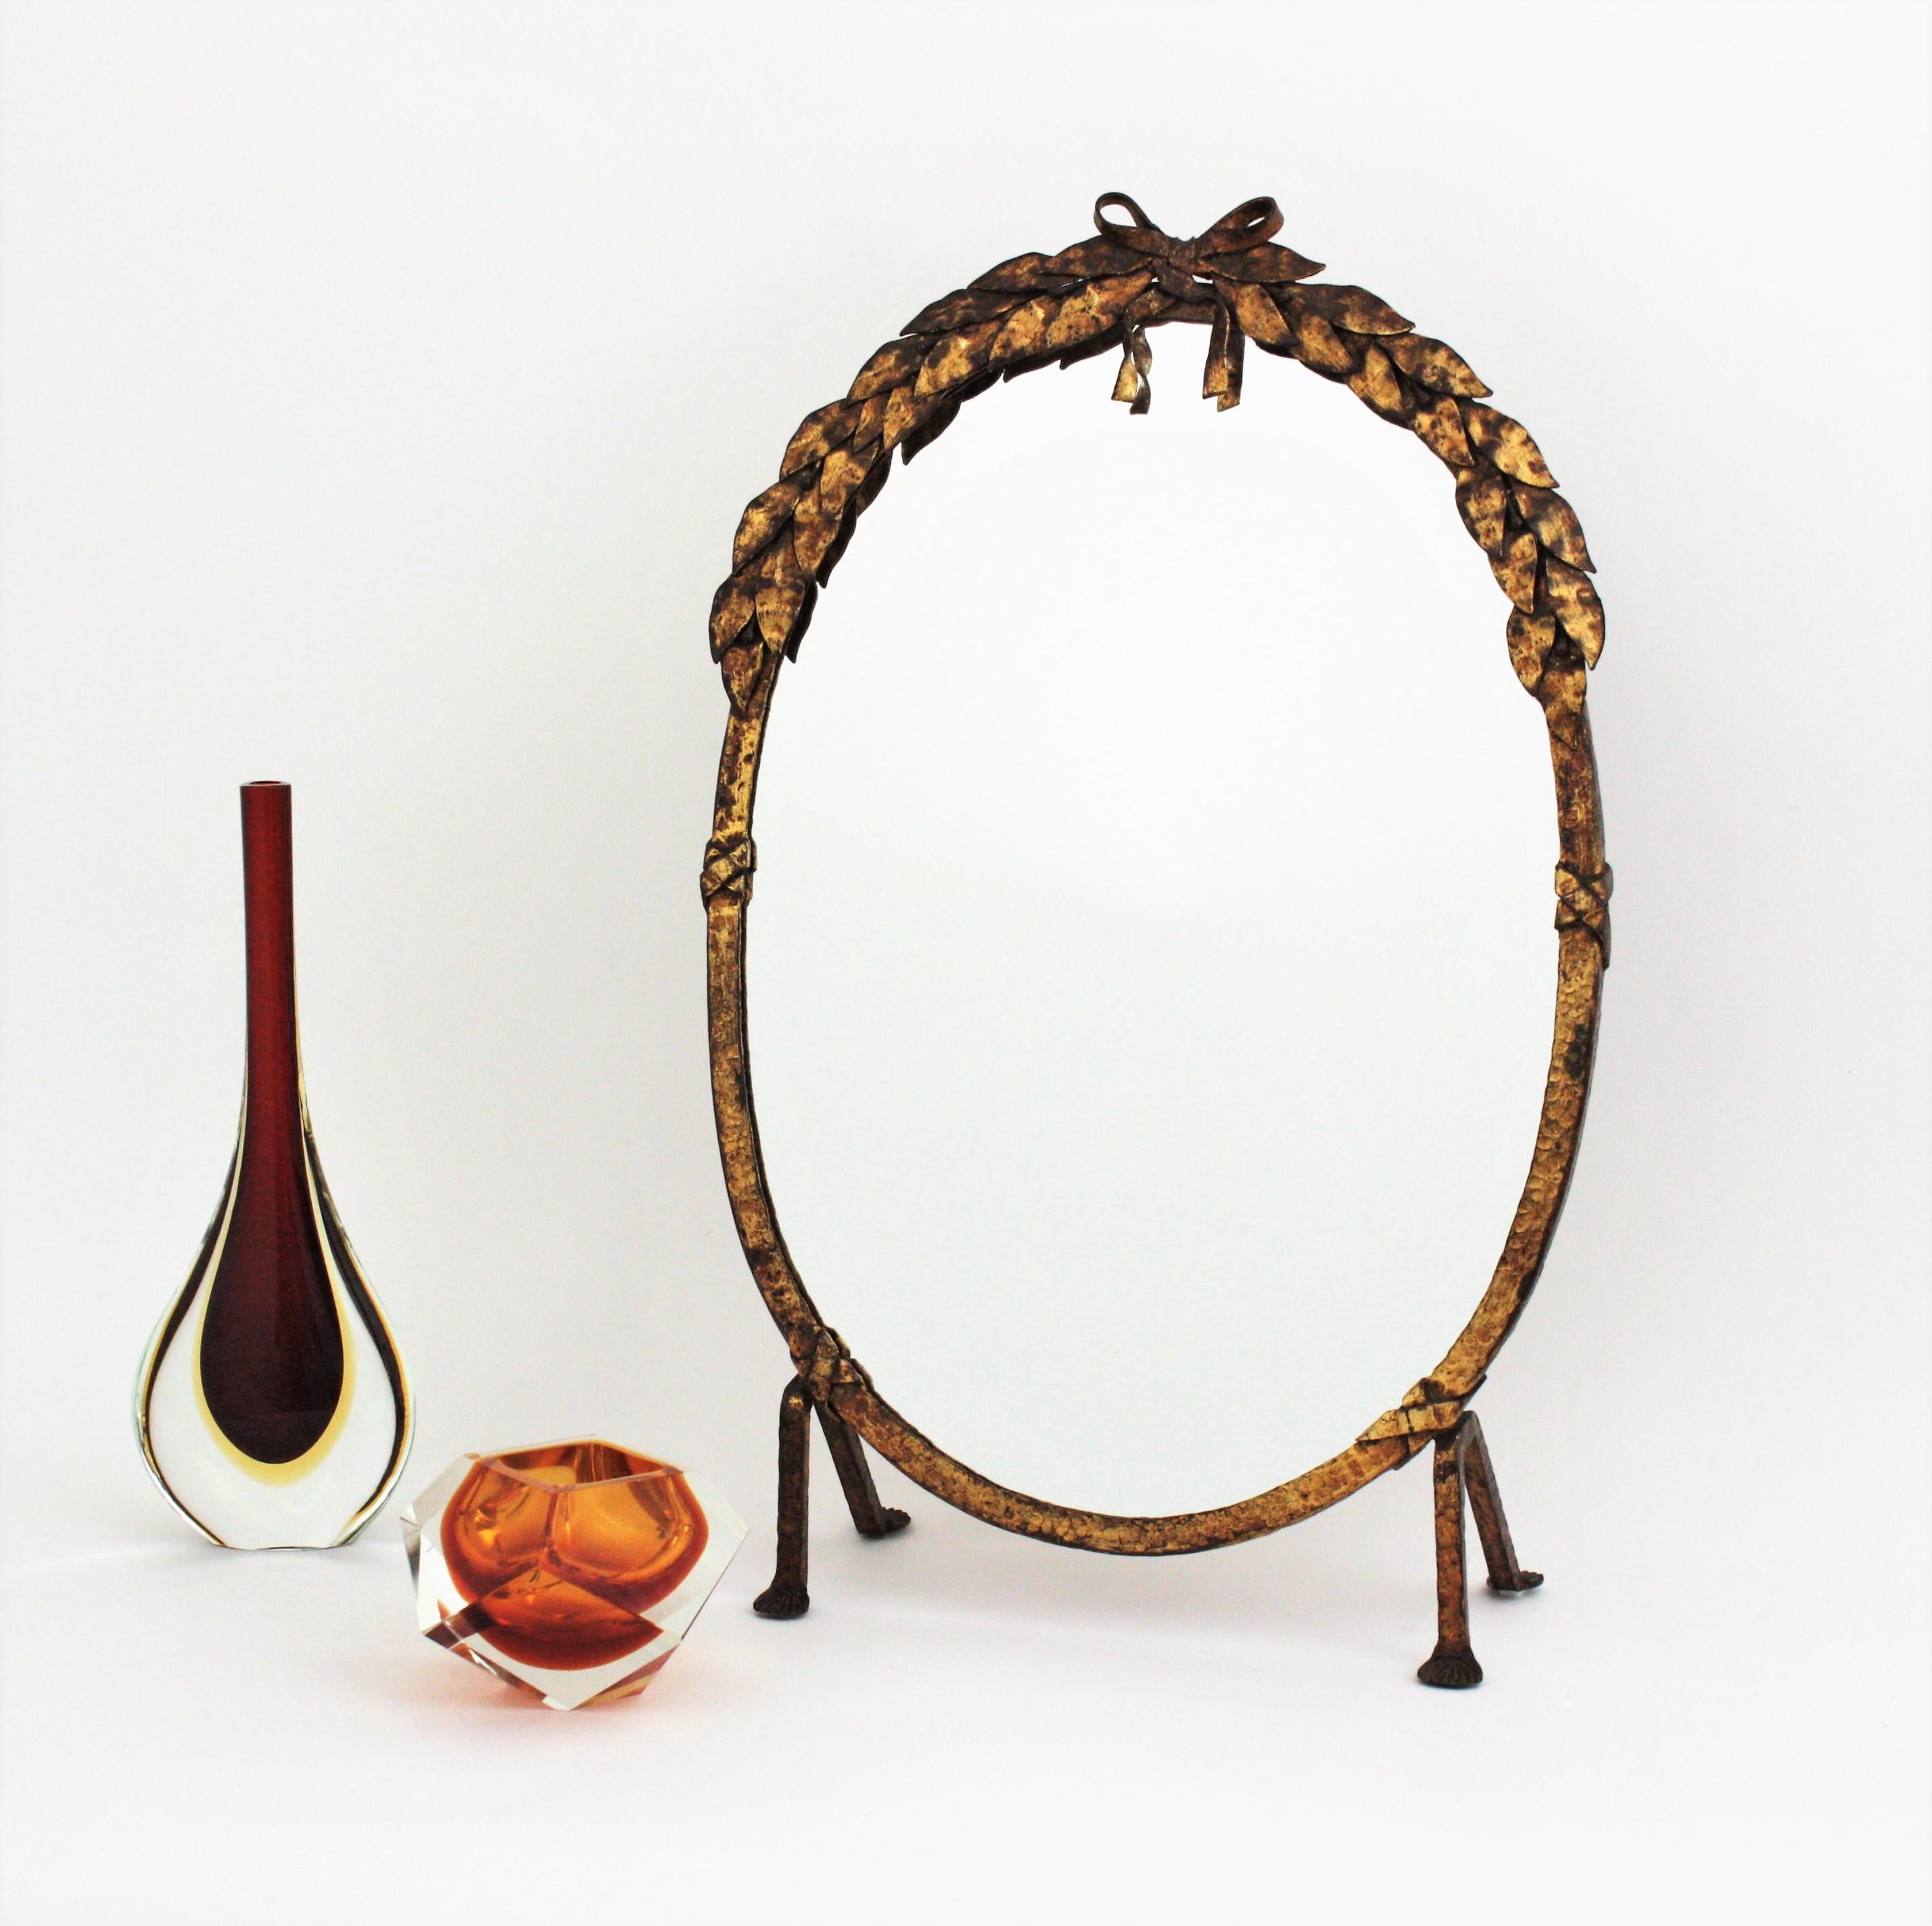 Stunning hand wrought iron oval table / vanity mirror or standing mirror with foliage details, France, 1940s.
This lovely oval mirror is all made by hand in iron. It stands up on four iron legs. The frame is heavily adorned by the hammer marks and